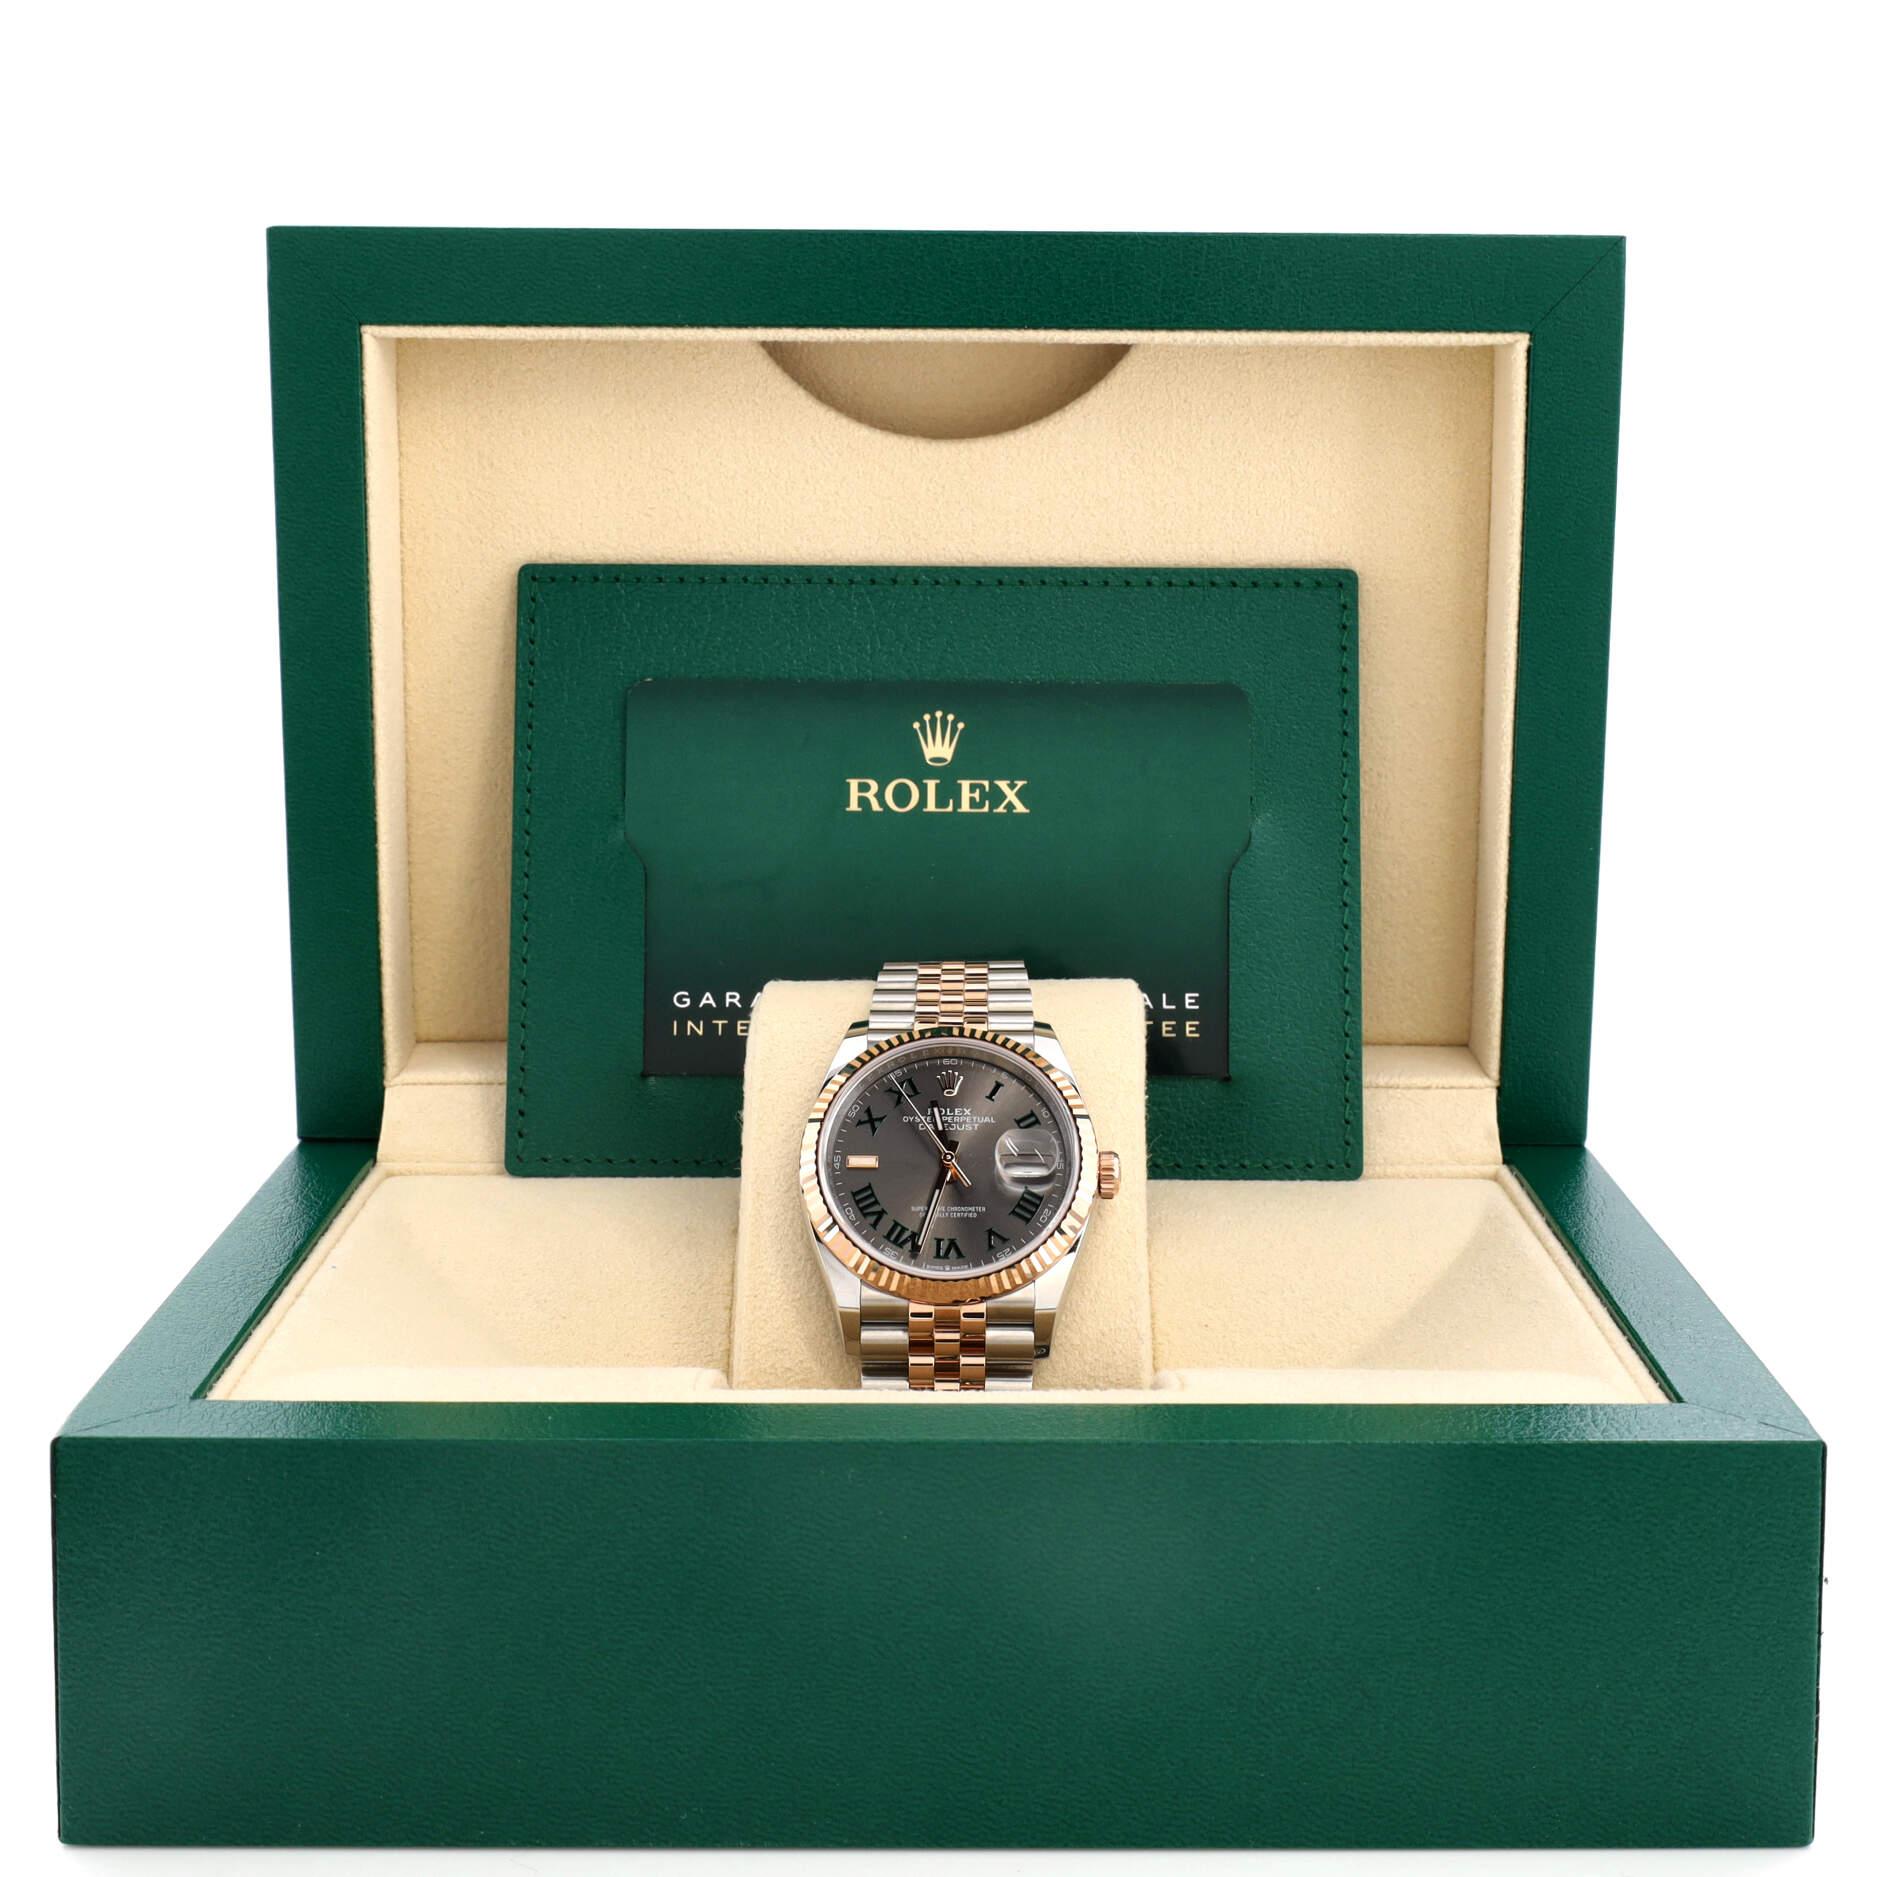 Condition: Excellent. Minor wear throughout.
Accessories: Warranty Card - Dated, Box, Instruction Booklet
Measurements: Case Size/Width: 36mm, Watch Height: 12mm, Band Width: 20mm, Wrist circumference: 6.5